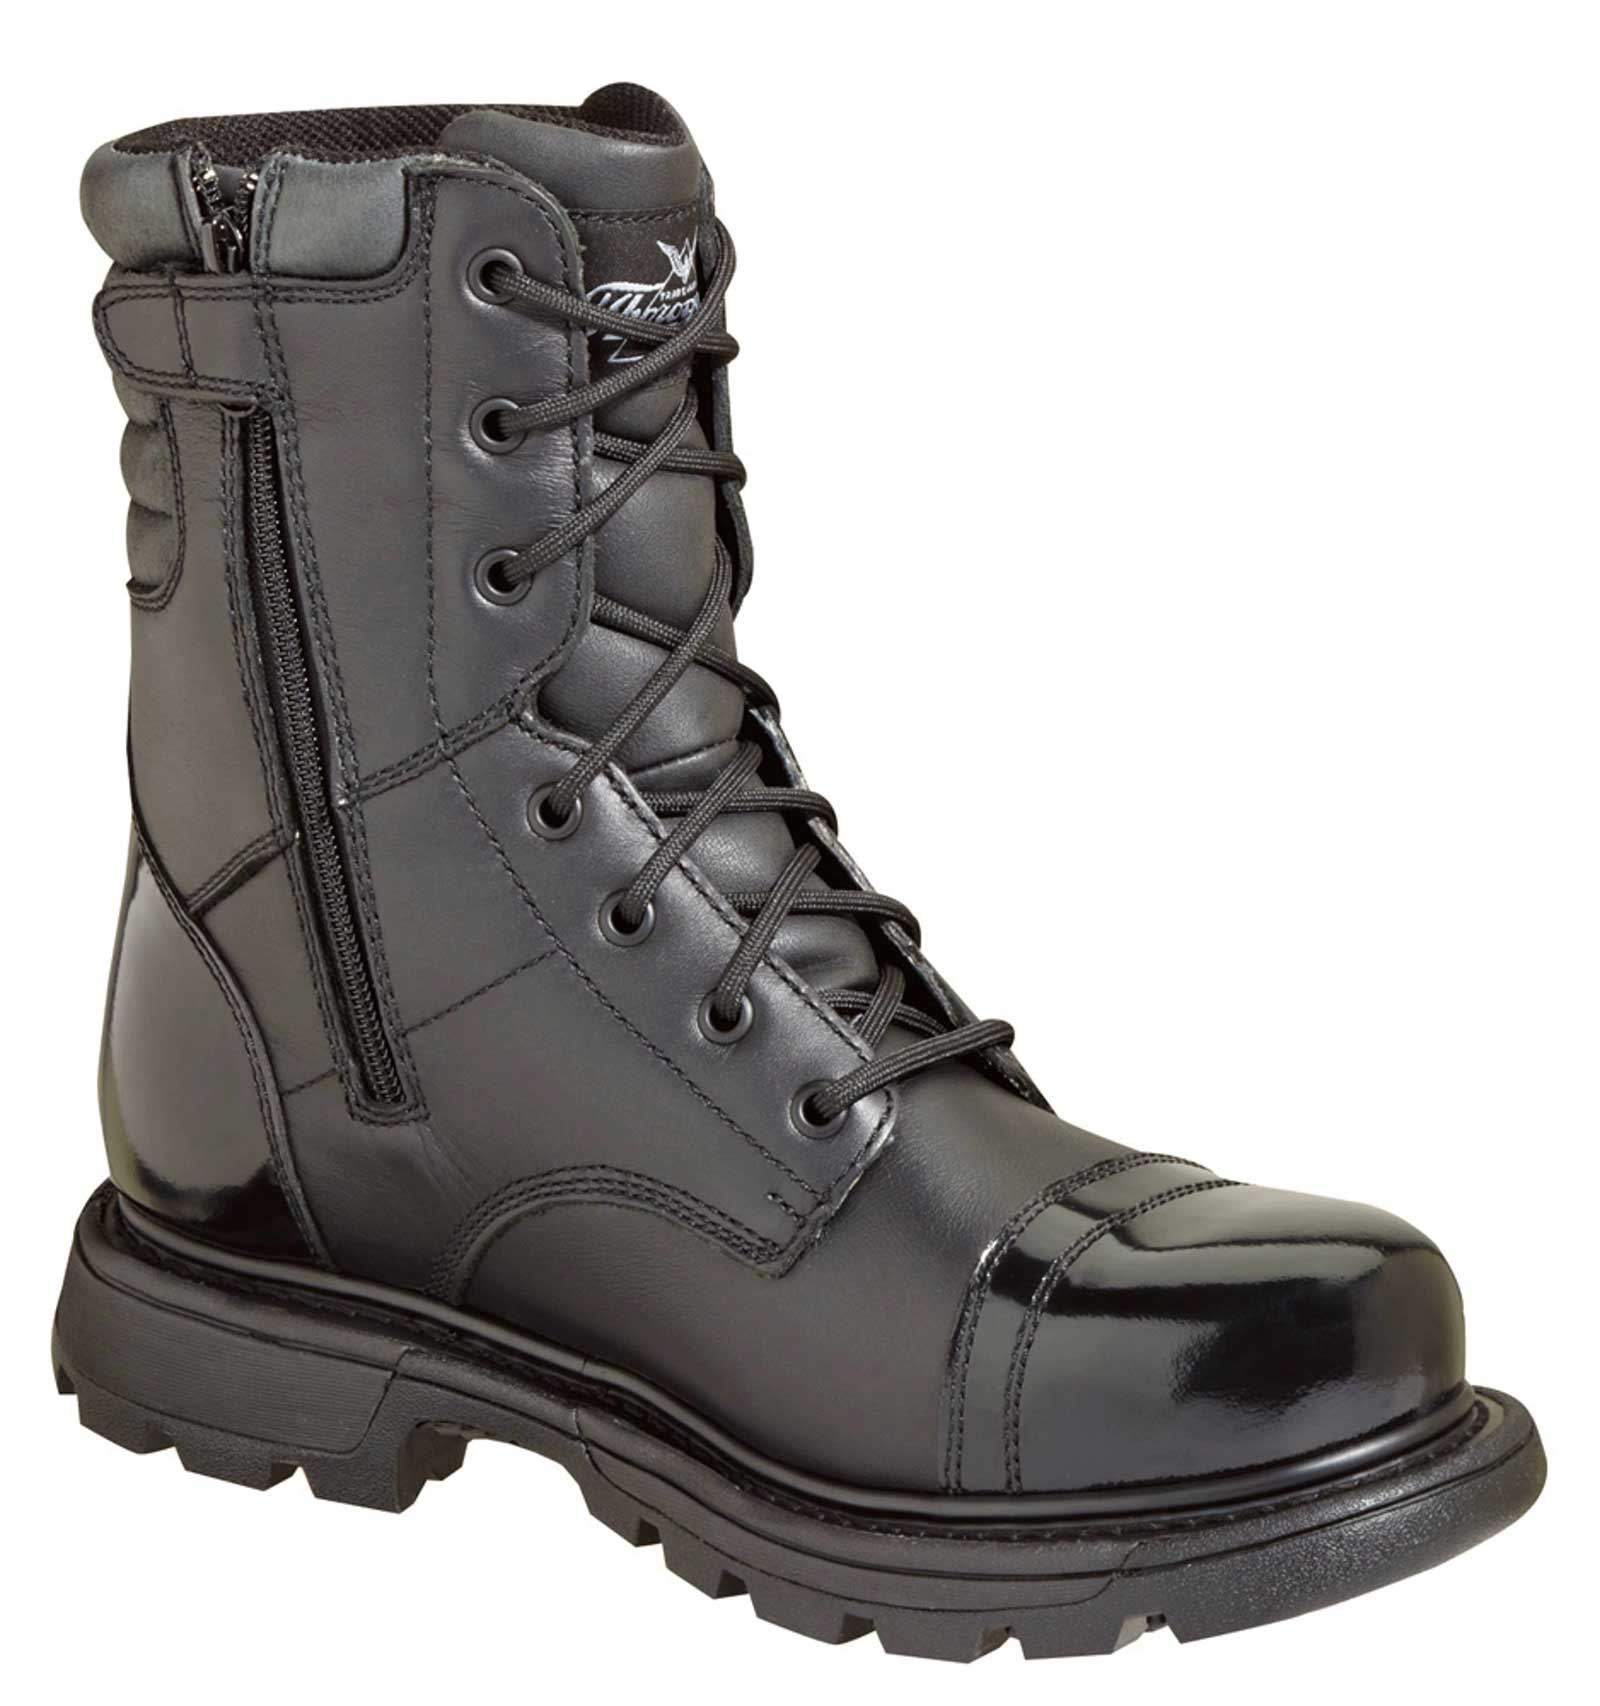 work boots with zipper on the side